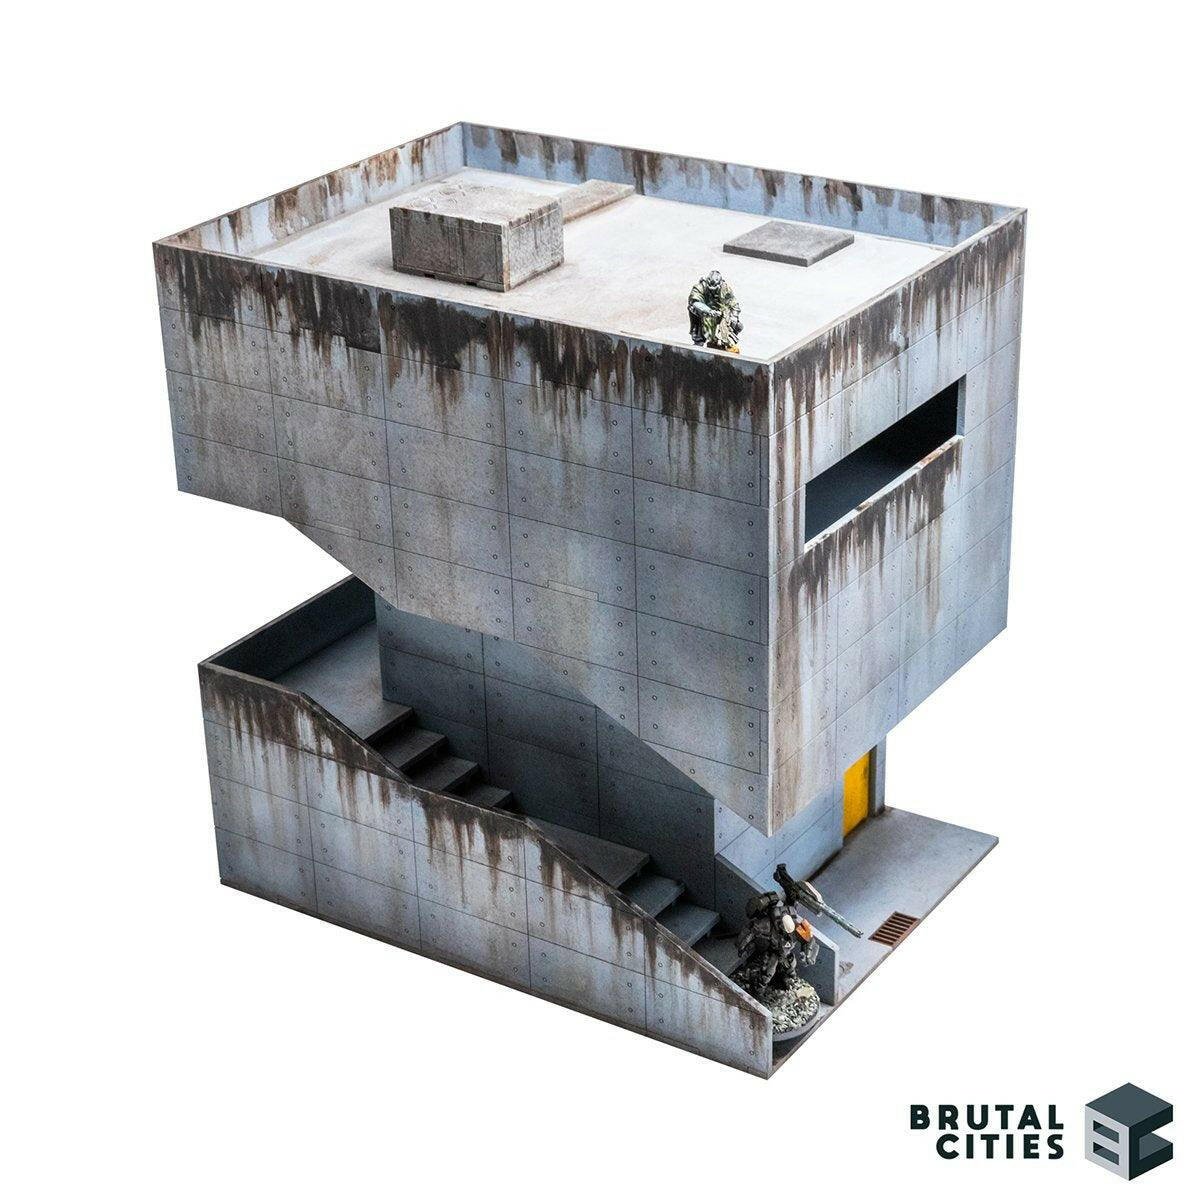 Concrete Brutalist terrain kit with a staircase and grime. Suitable for Sci-fi and cyberpunk settings. Aircon on roof